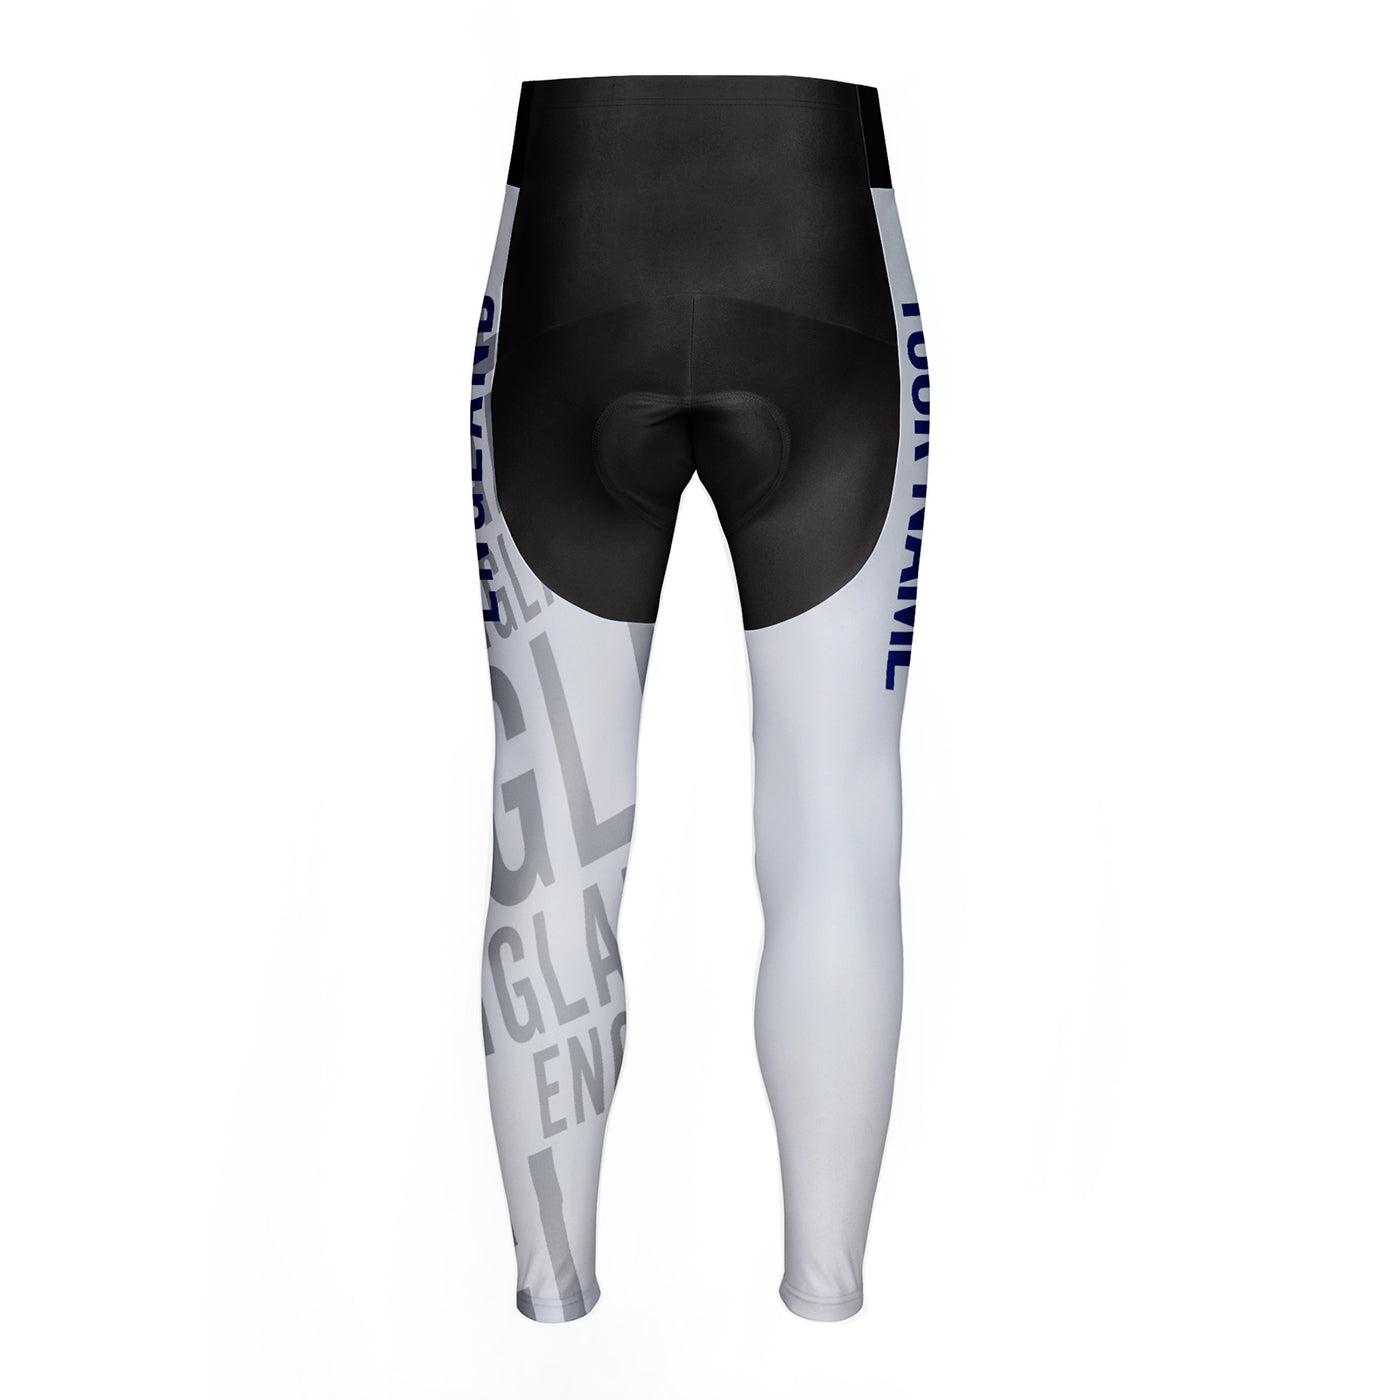 Customized England Unisex Cycling Tights Long Pants